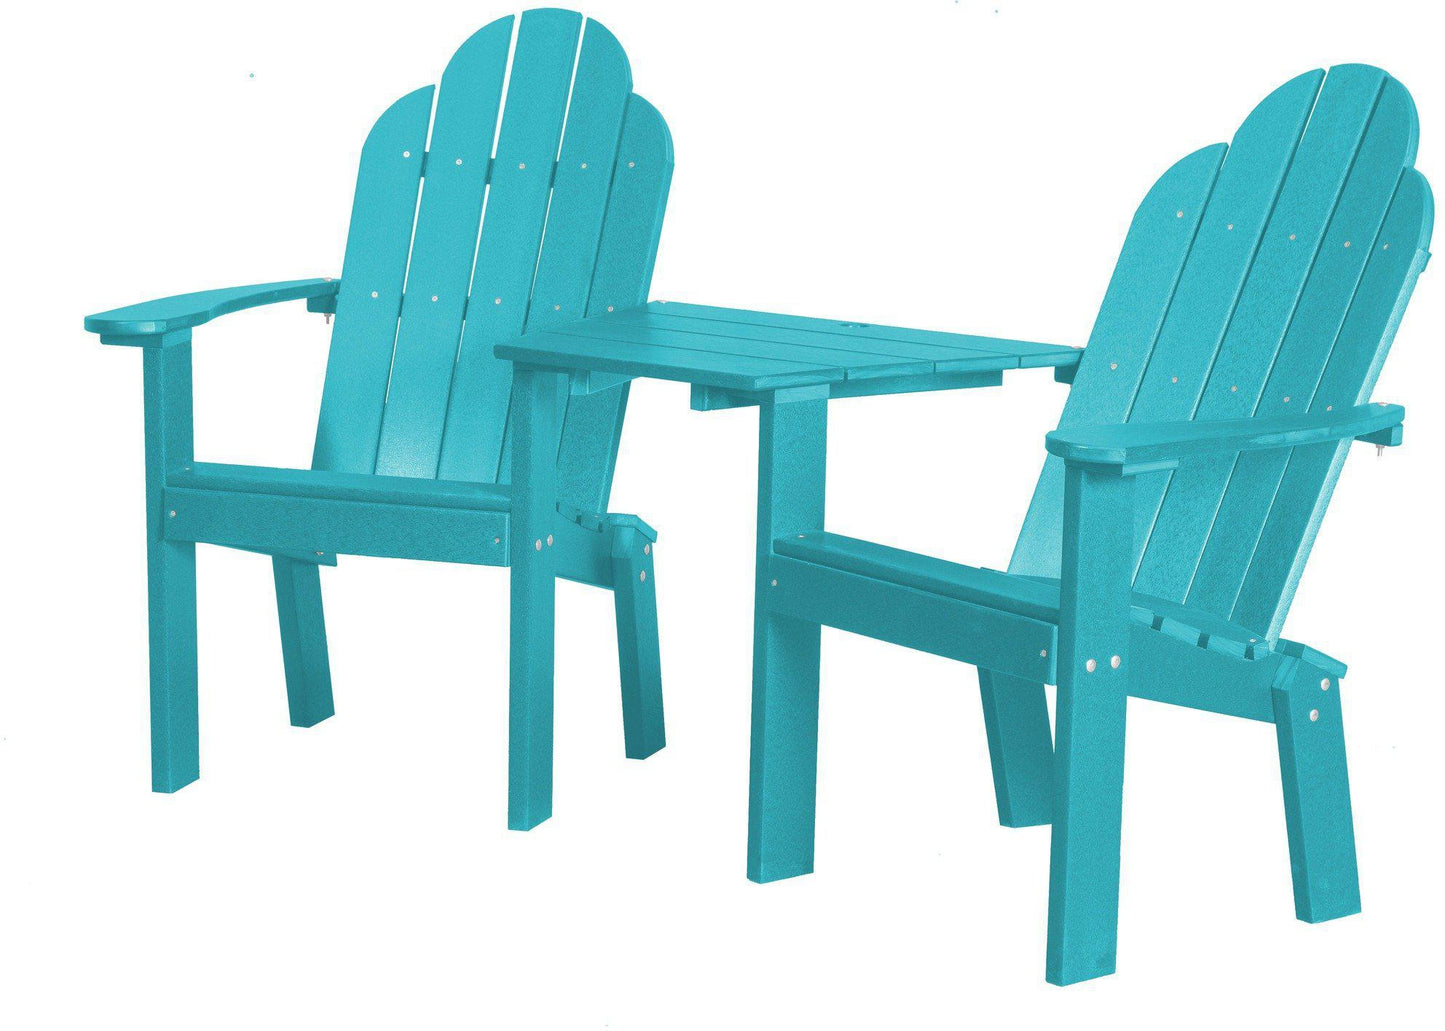 Wildridge Outdoor Recycled Plastic Classic Deck Chair Tete a Tete - LEAD TIME TO SHIP 3 WEEKS